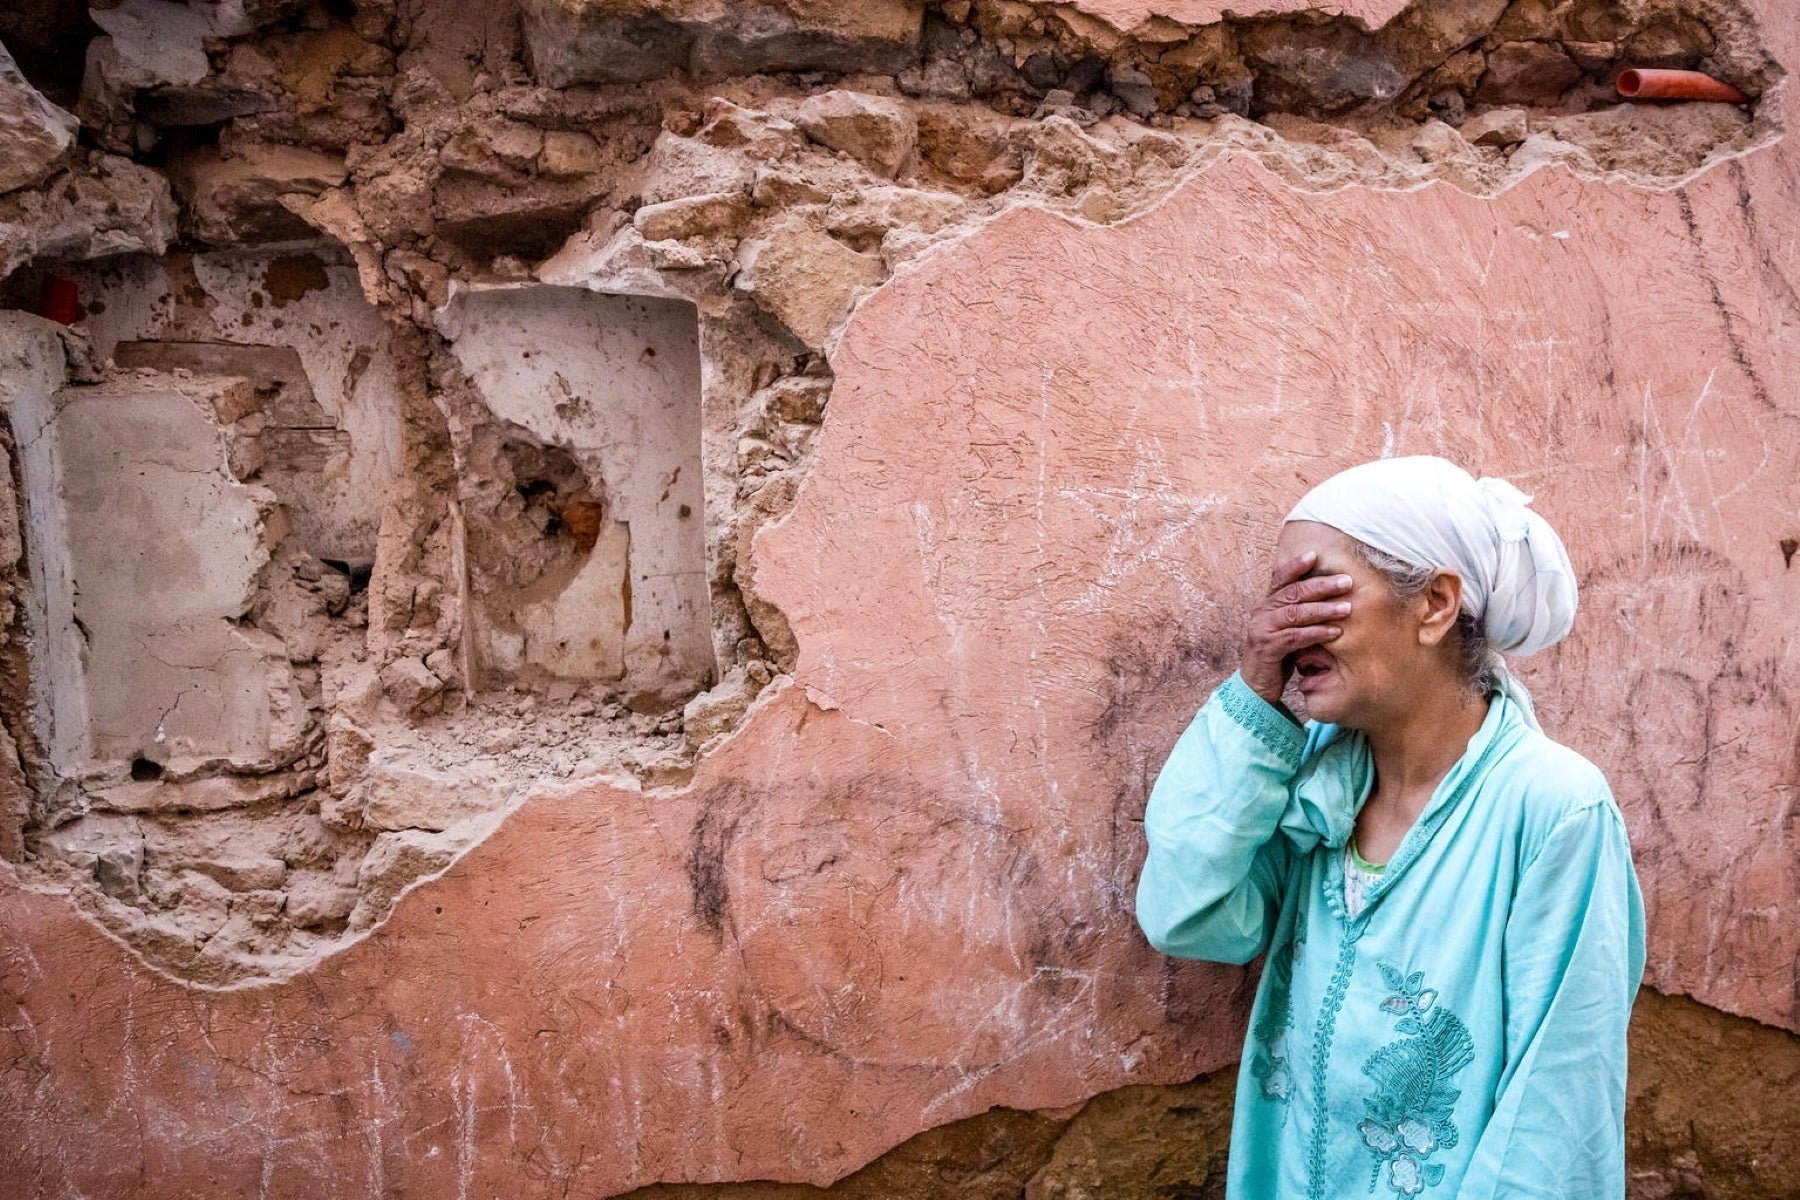 A woman's home was destroyed by the earthquake in Morocco.